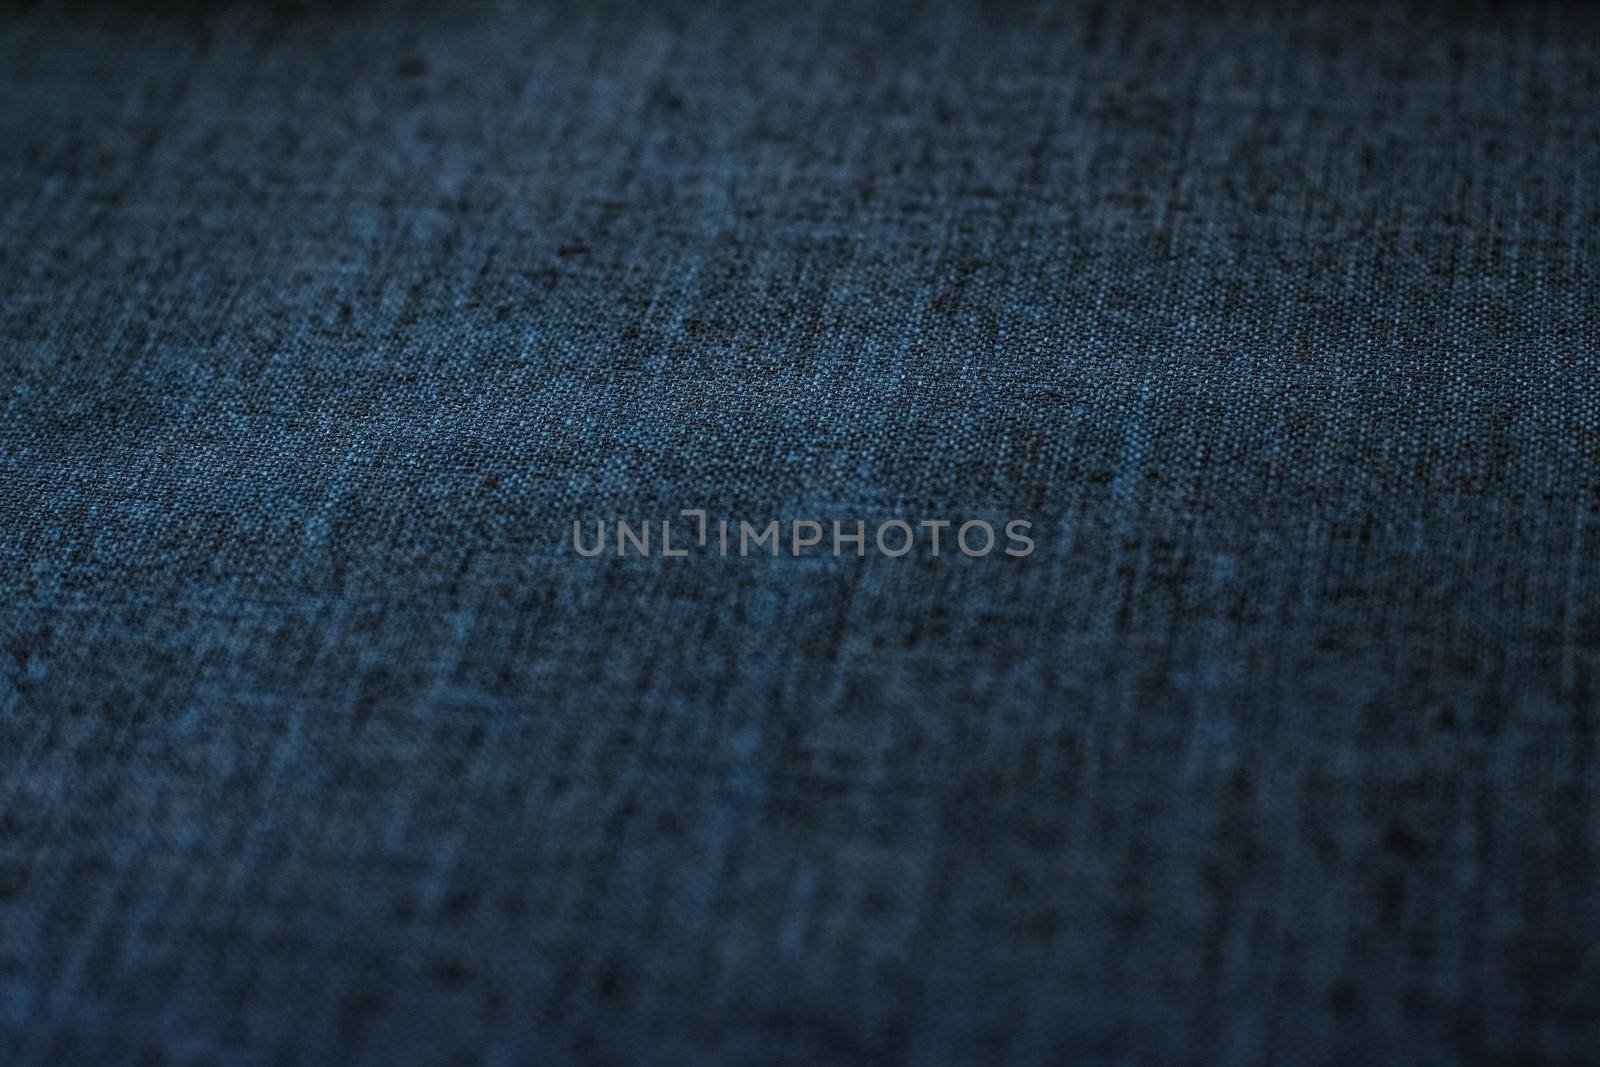 Textile material, natural surface and vintage decor texture concept - Decorative linen blue jeans fabric textured background for interior, furniture design and fashion label backdrop